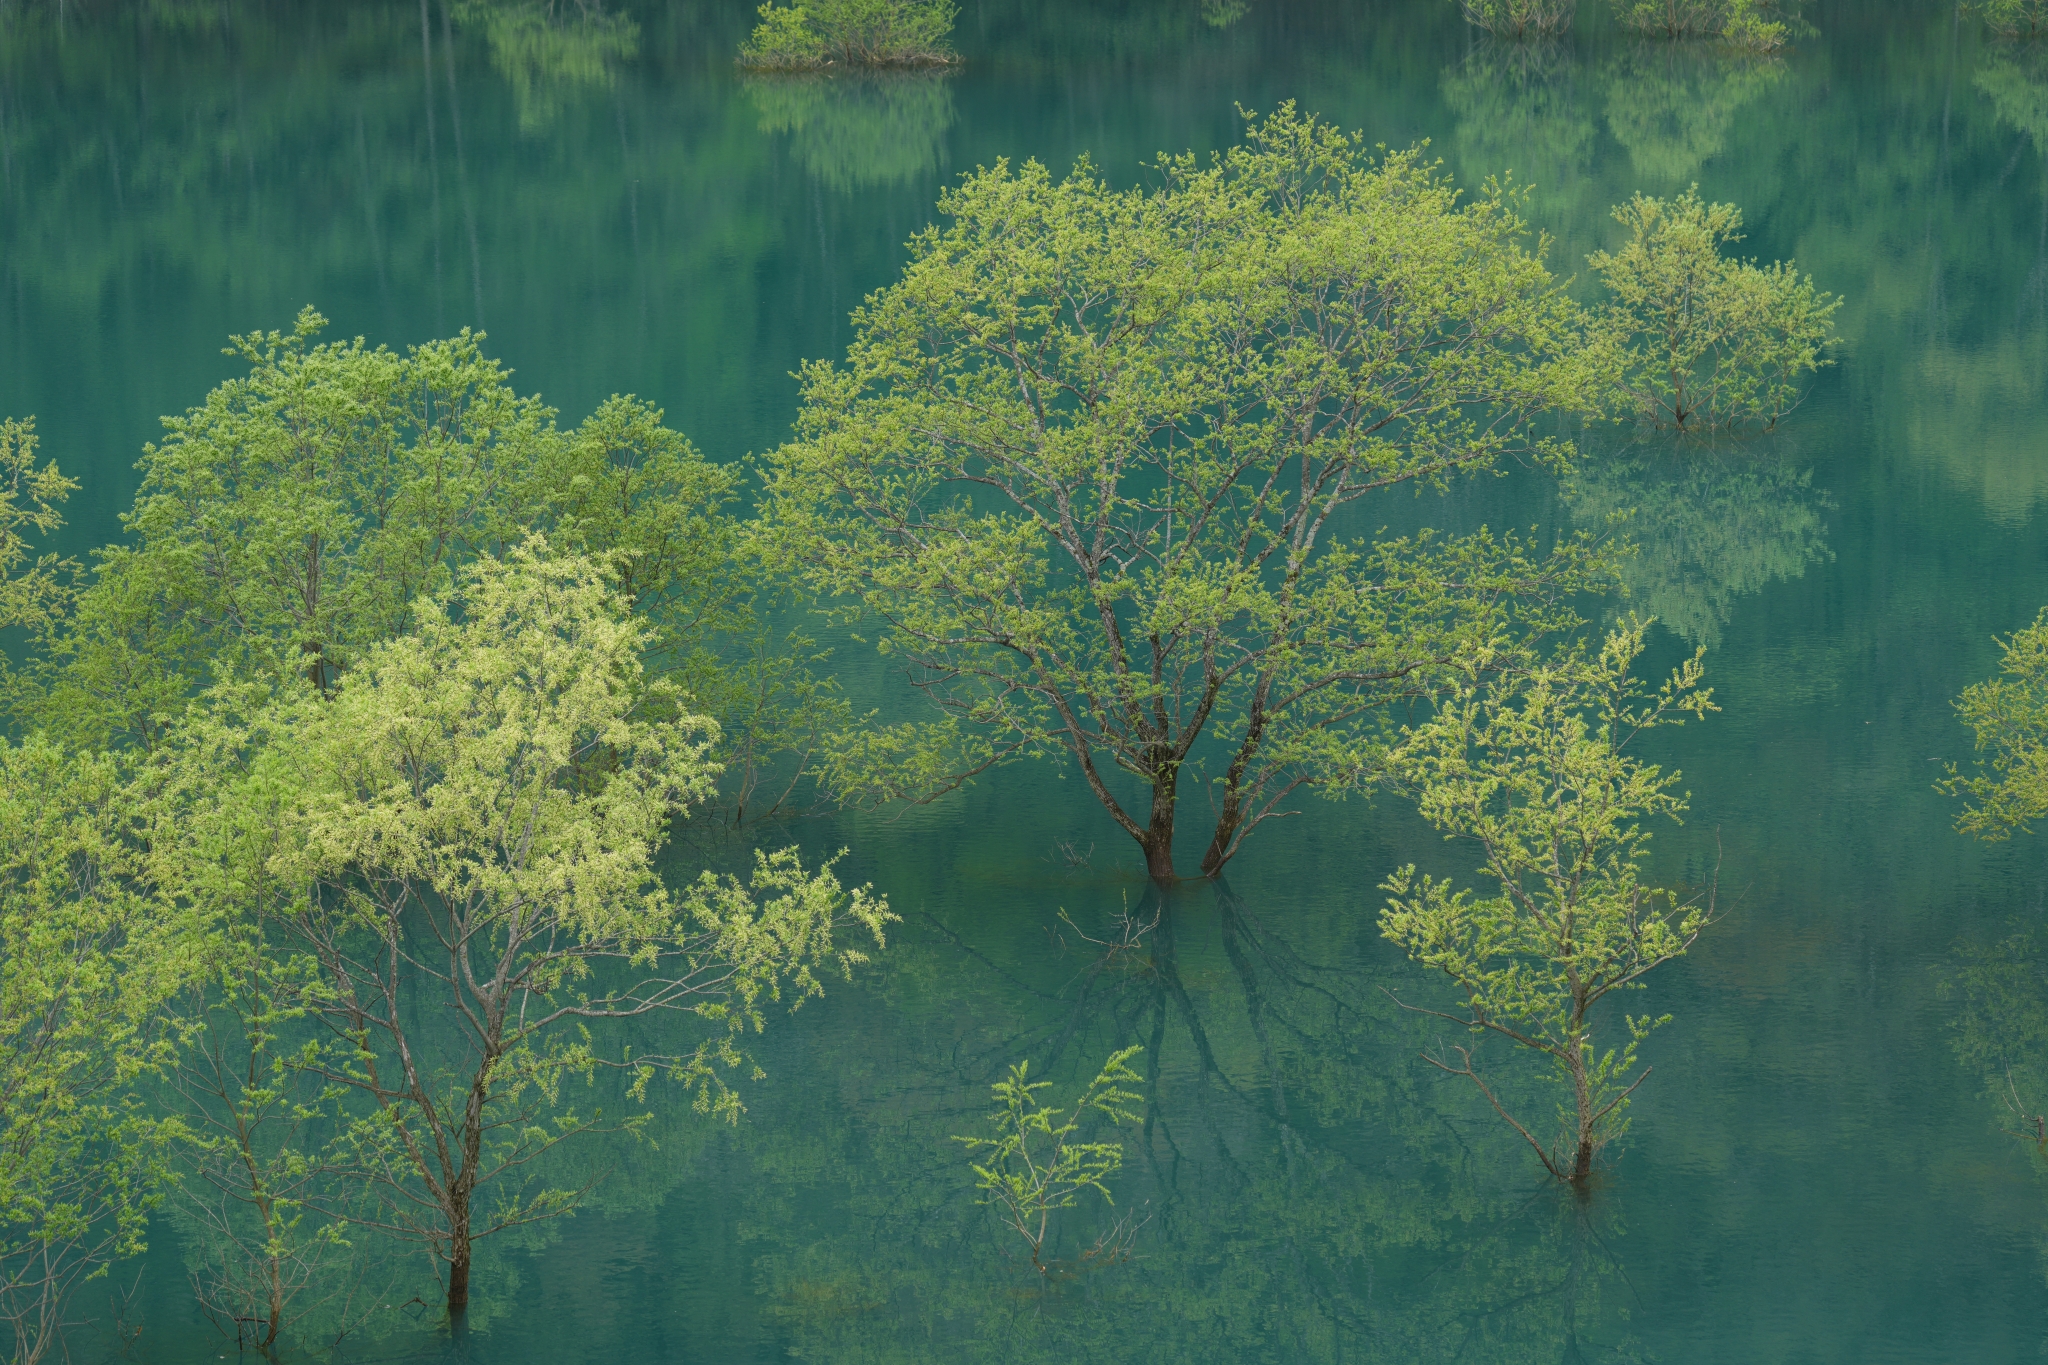 Trees growing in shallow water with reflections